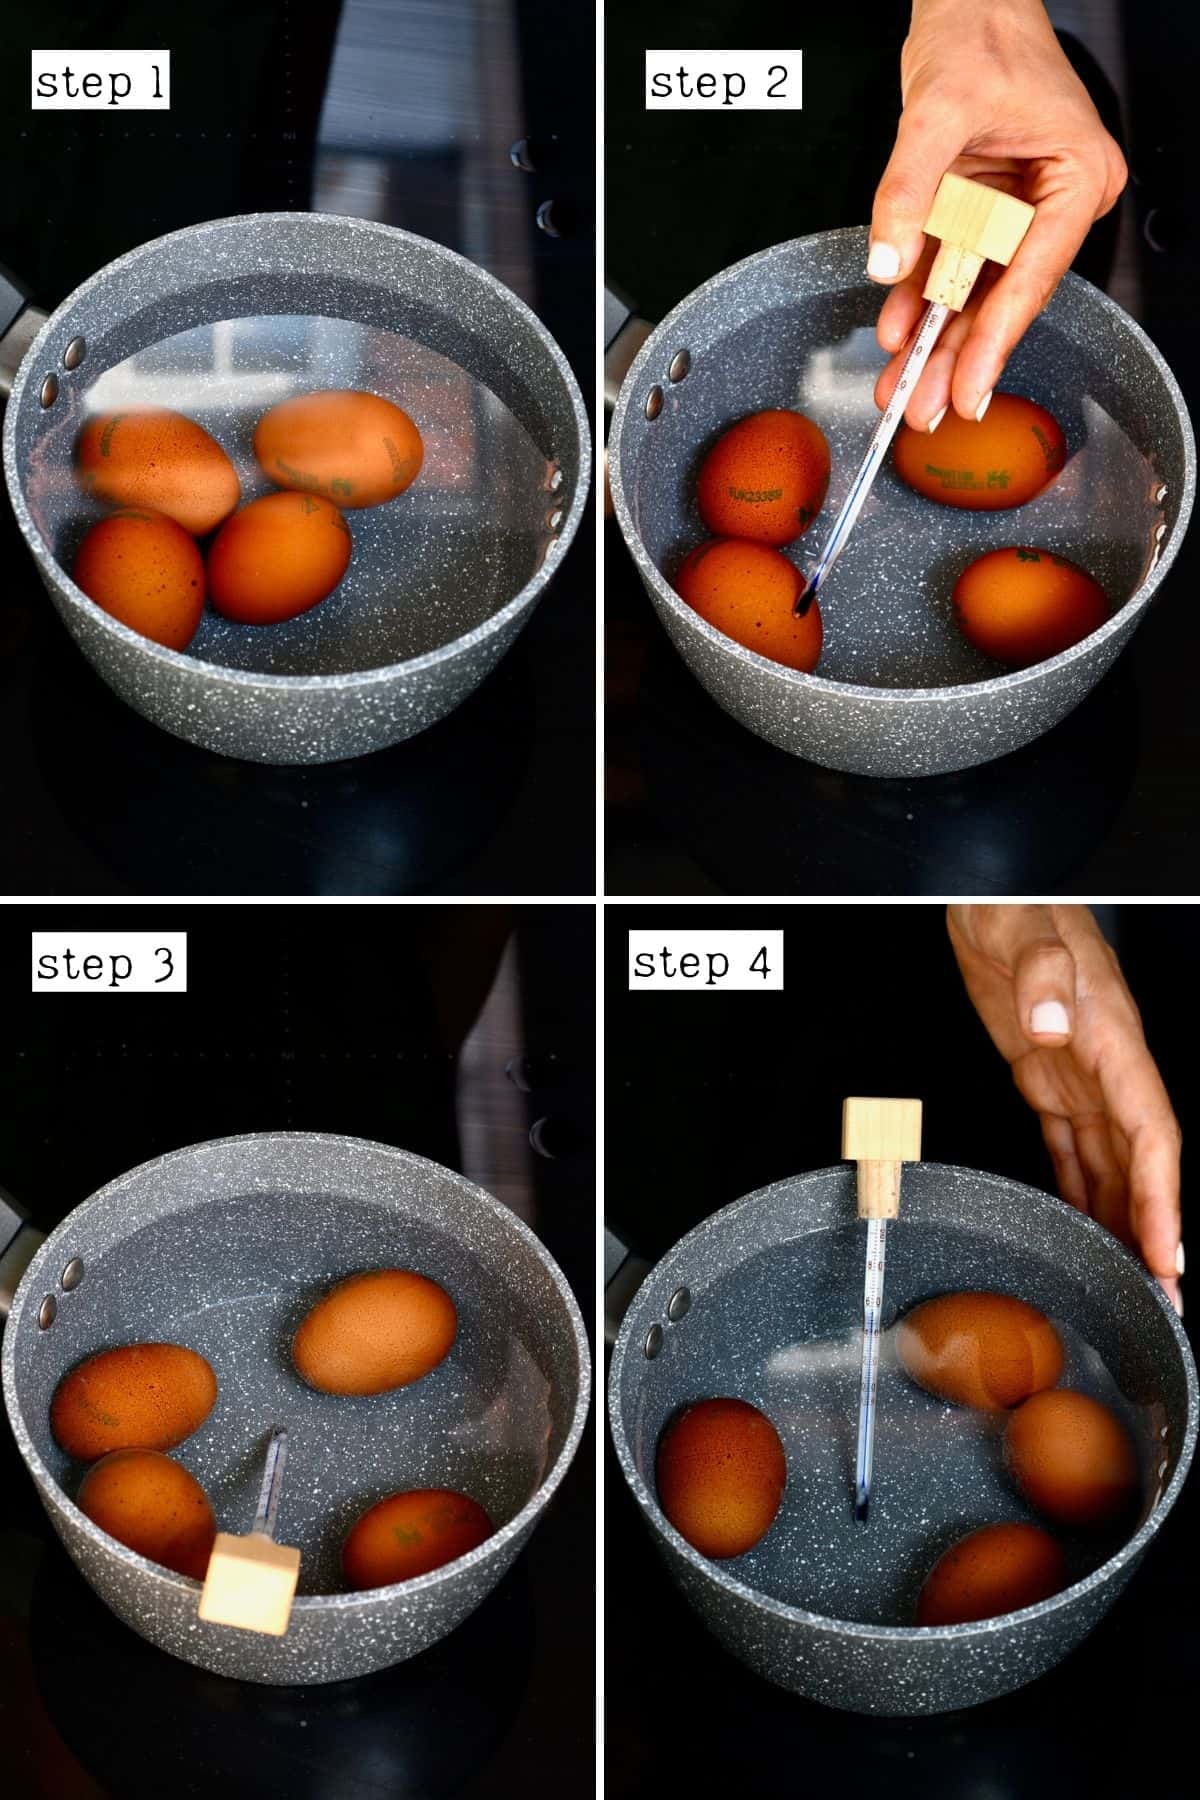 Steps for pasteurizing eggs